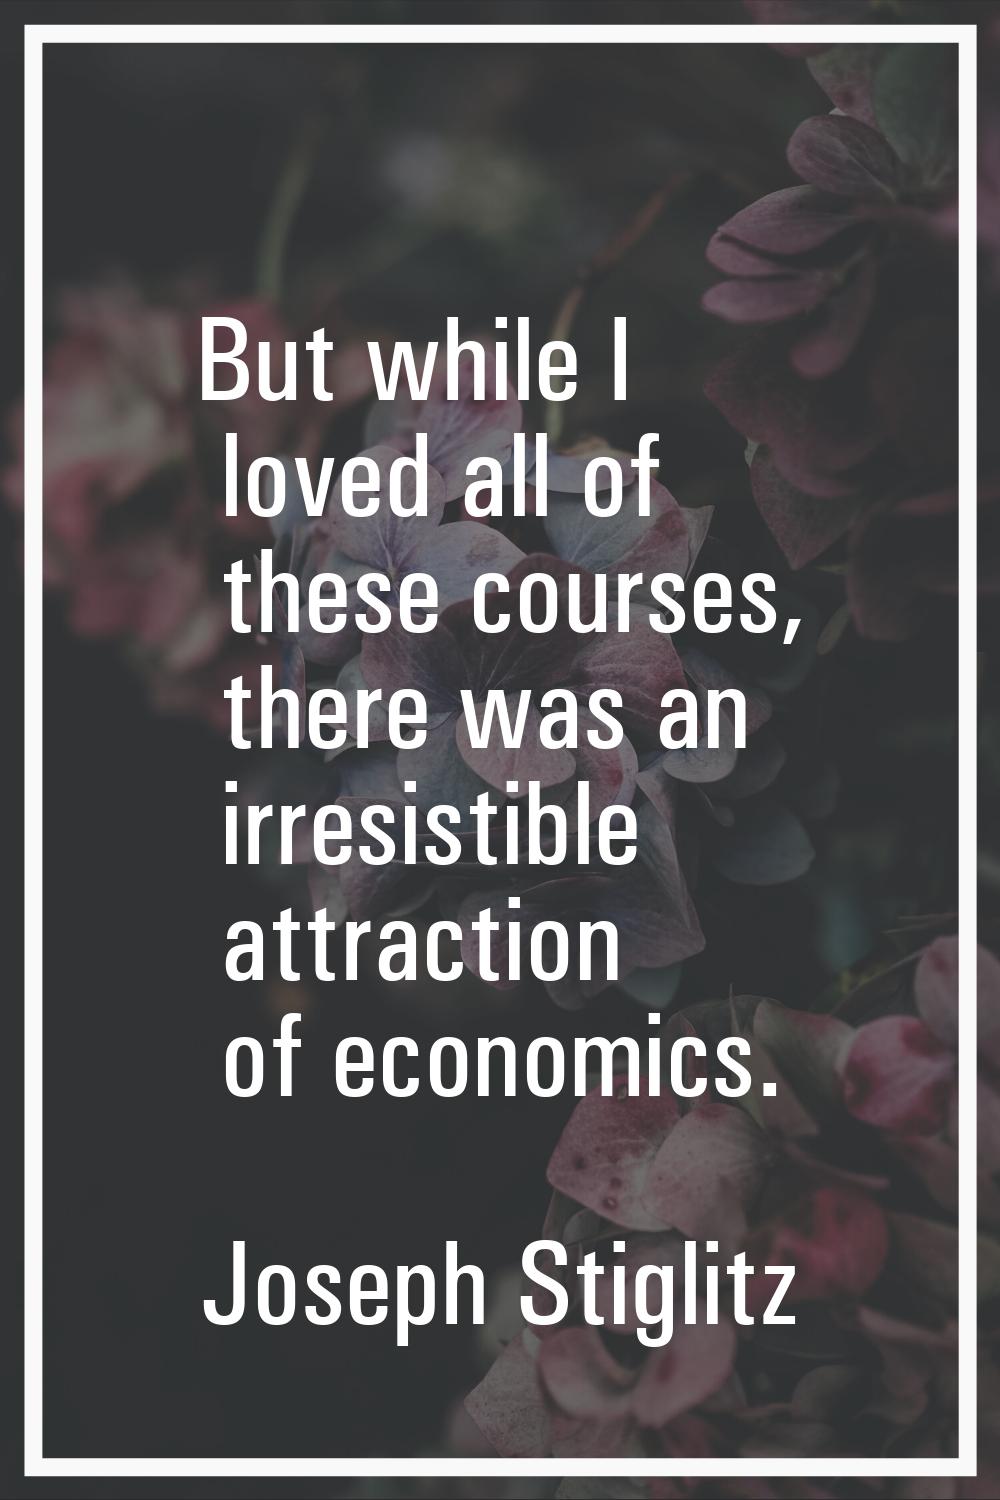 But while I loved all of these courses, there was an irresistible attraction of economics.